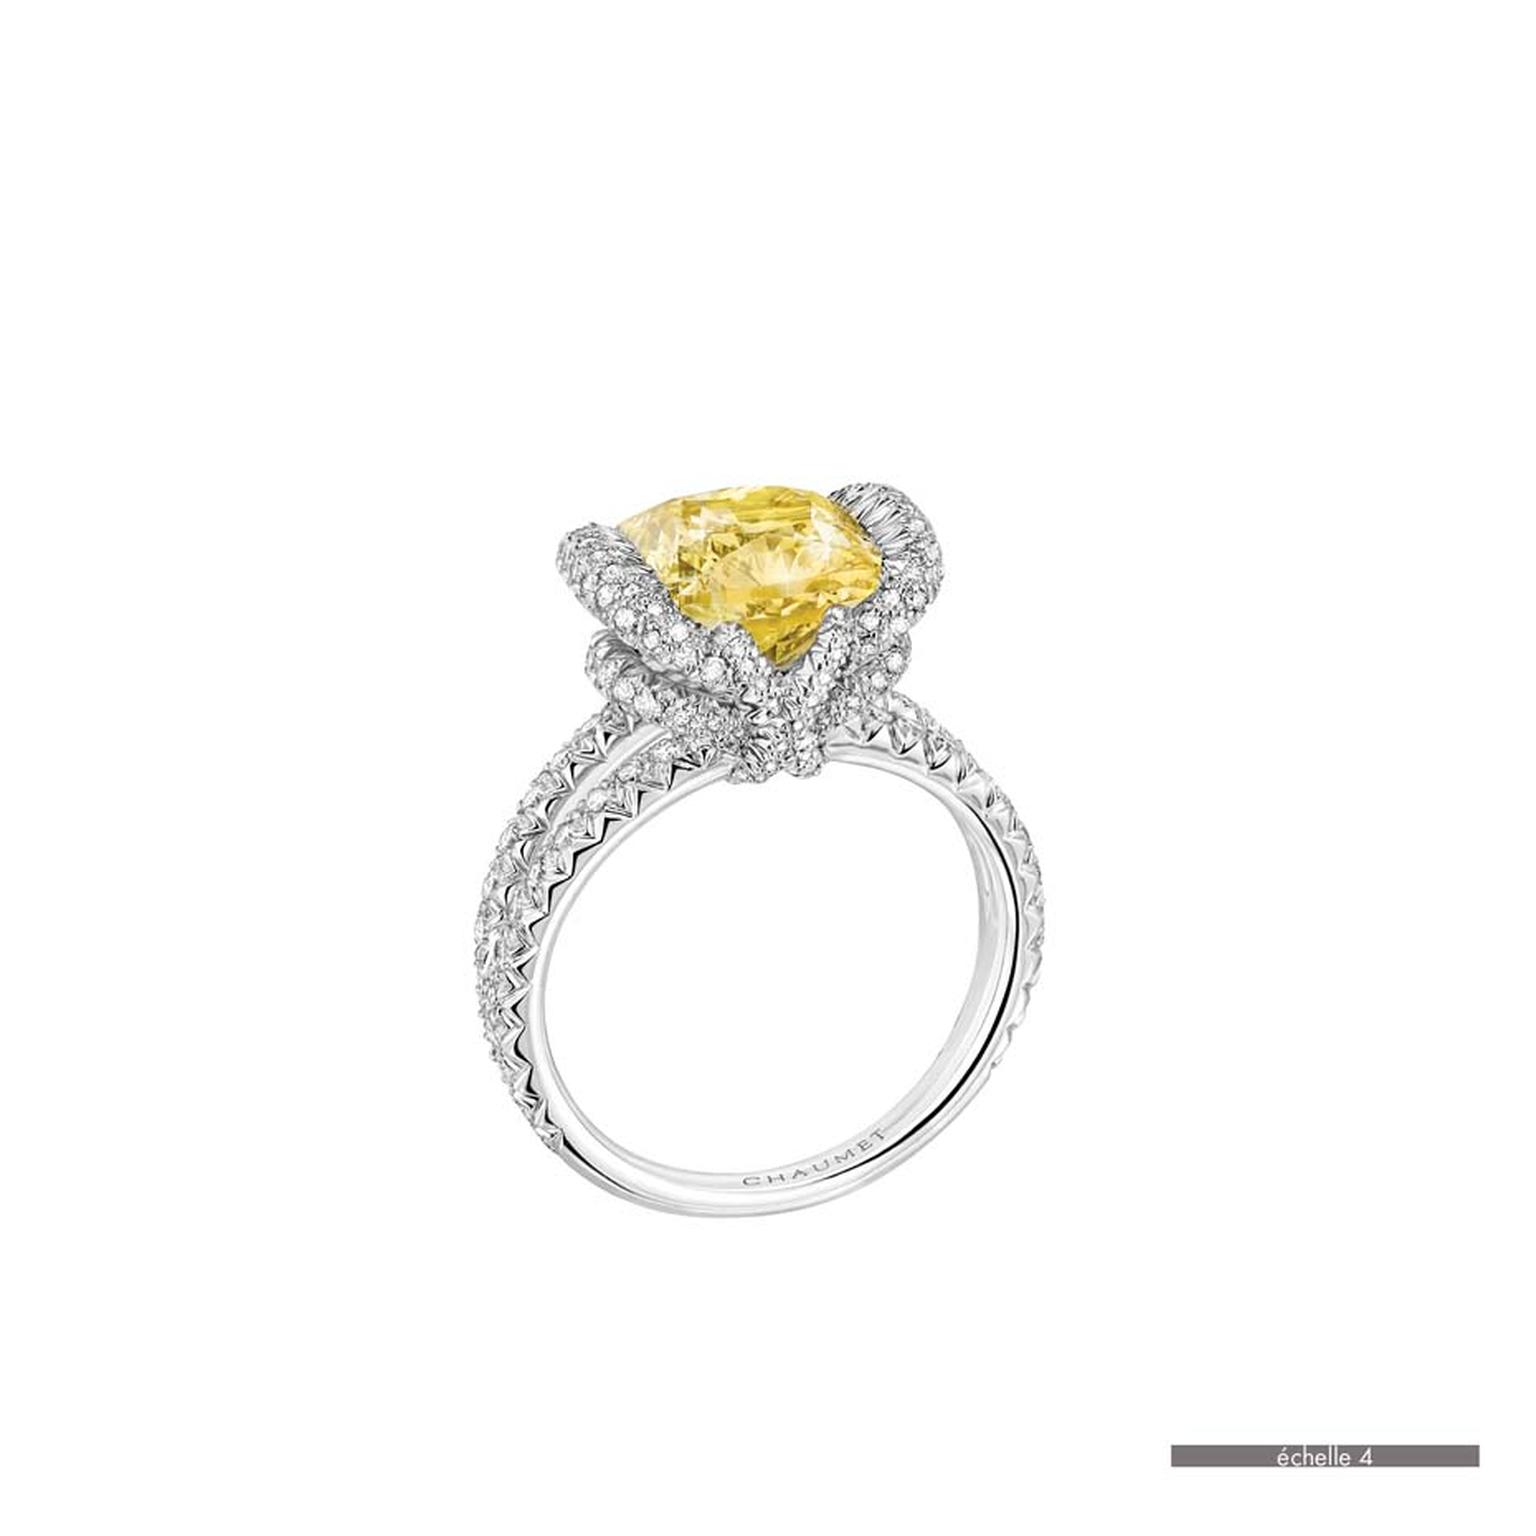 Chaumet Liens ring in white gold featuring 144 brilliant-cut diamonds and a cushion-cut yellow diamonds (93.41ct).